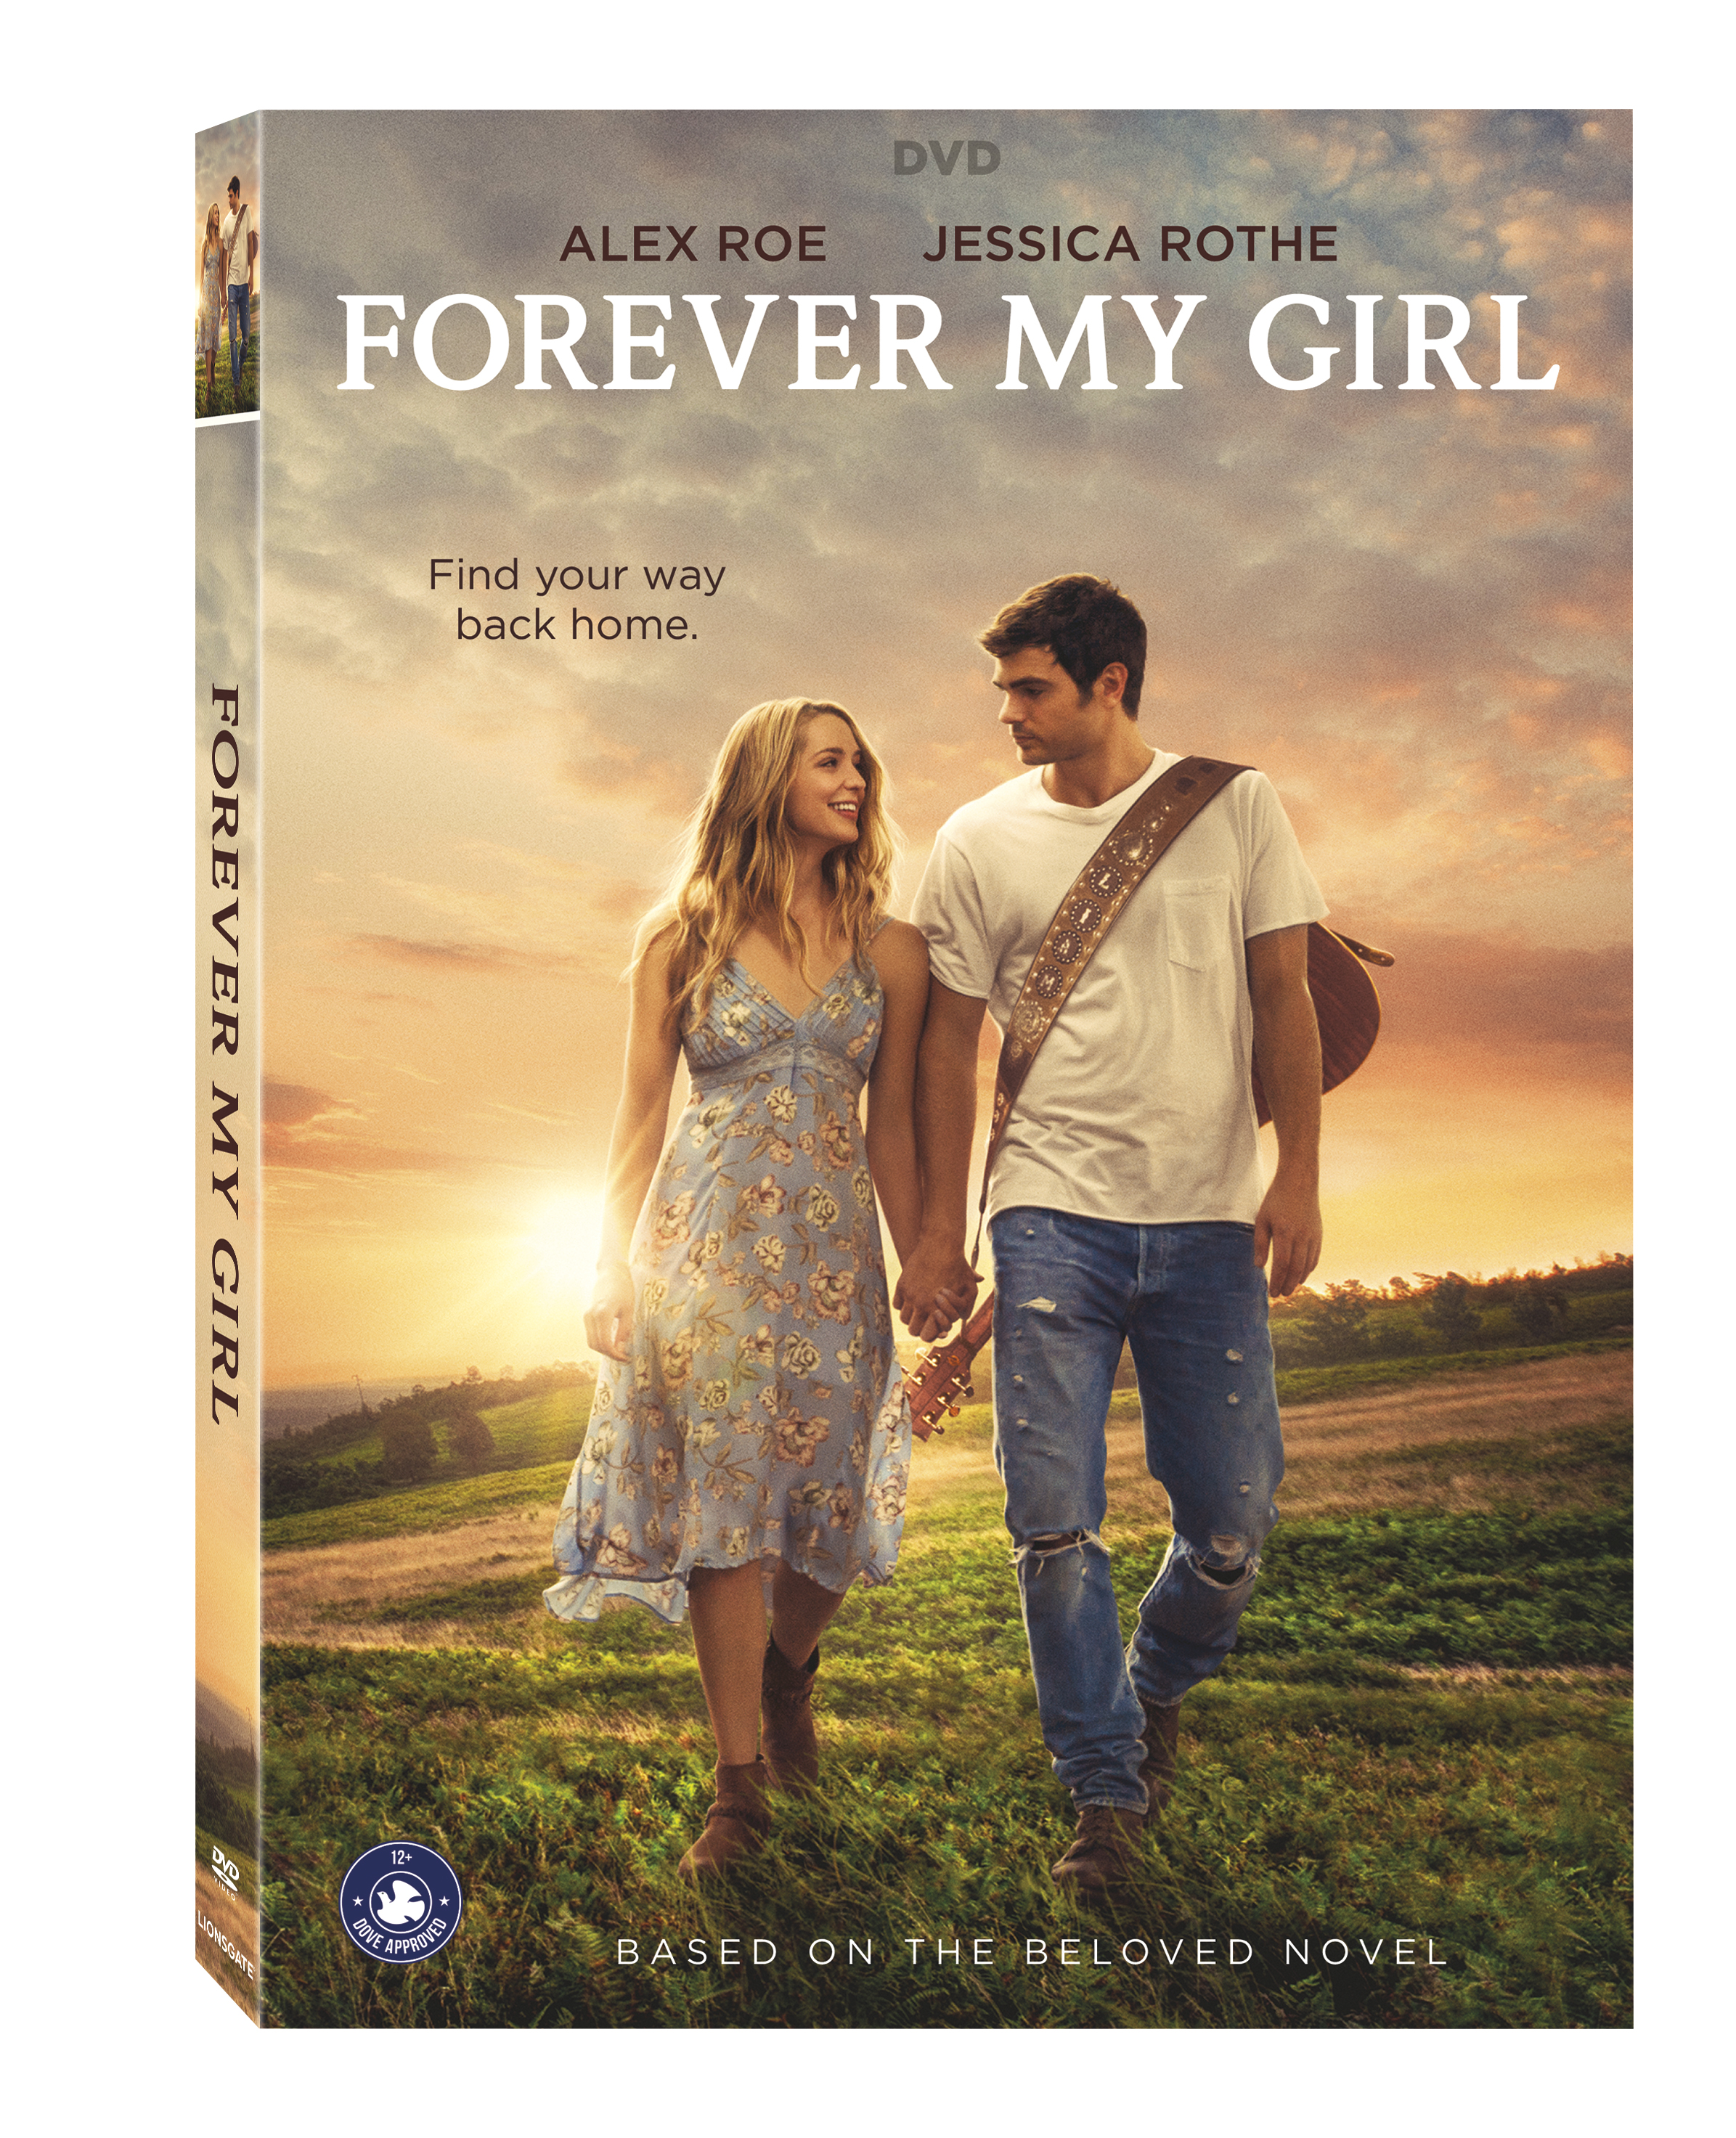 Forever My Girl DVD Cover (Lionsgate Home Entertainment)